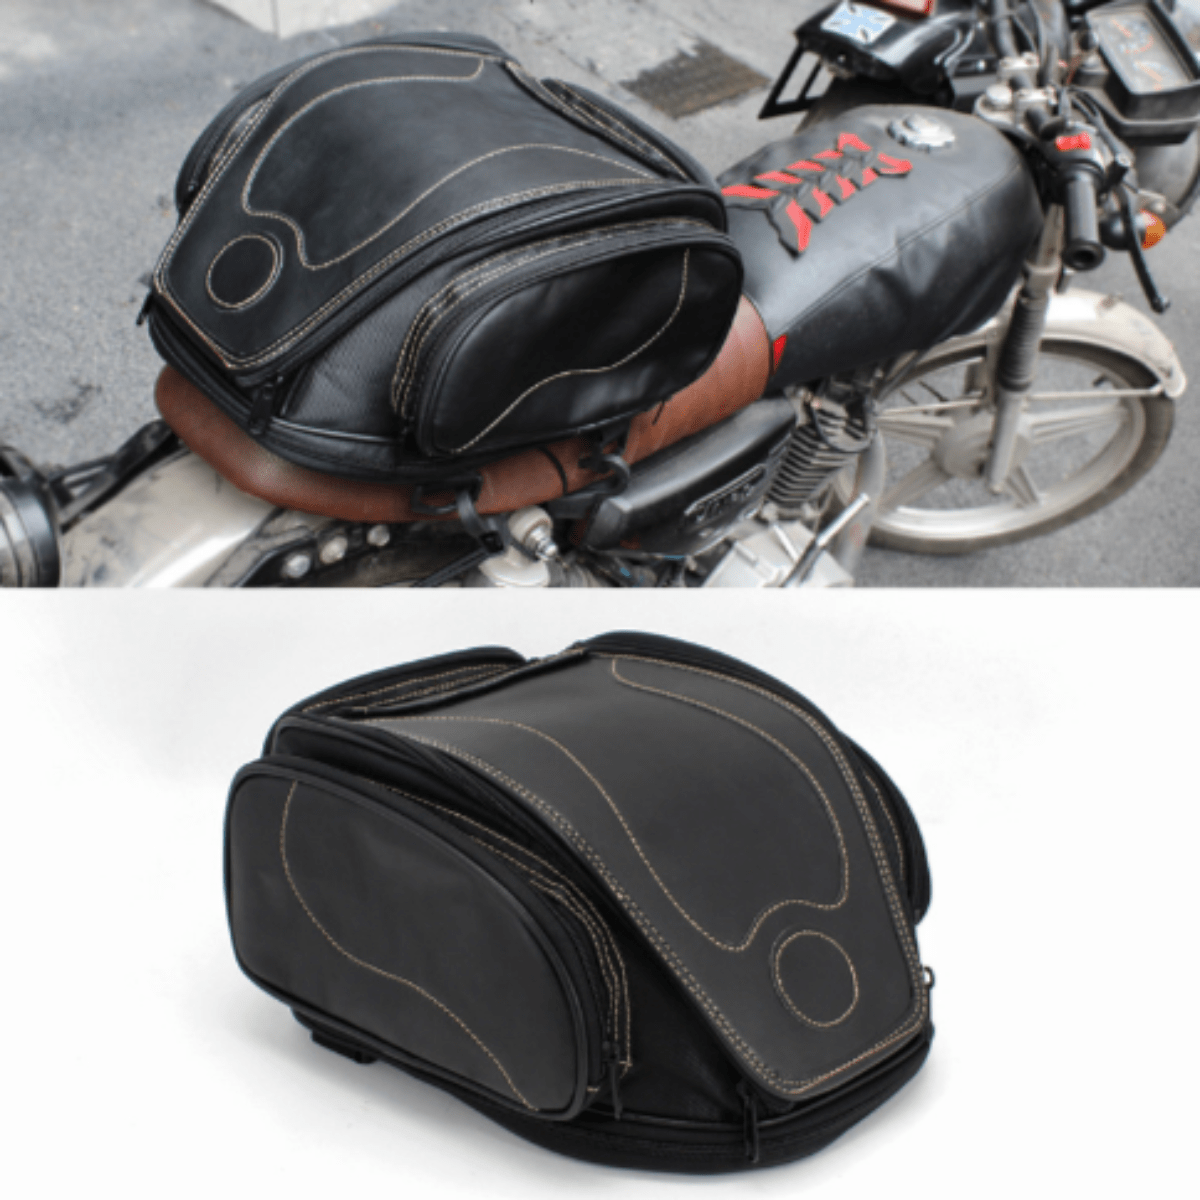 Two pictures of the Universal Motorcycle Retro Tail Bag with Waterproof Cover featuring a waterproof leather and fiber material.